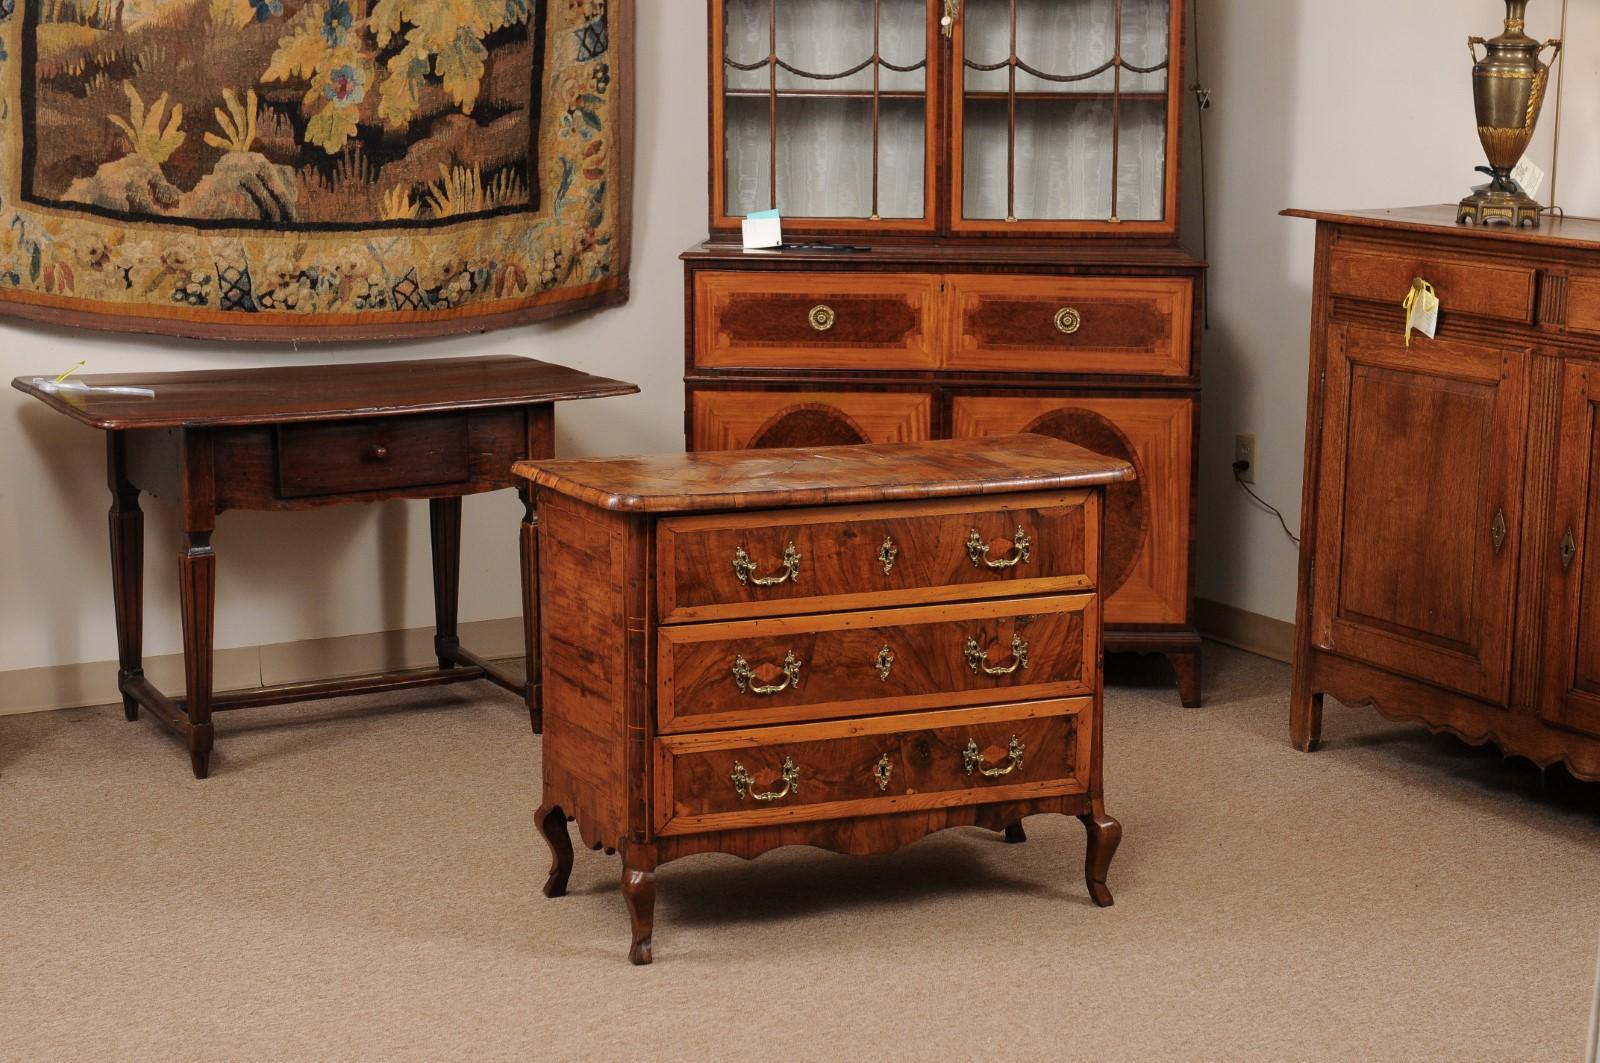 18th Century and Earlier 18th Century Italian 3-Drawer Commode in Olivewood with Cabriole Legs For Sale